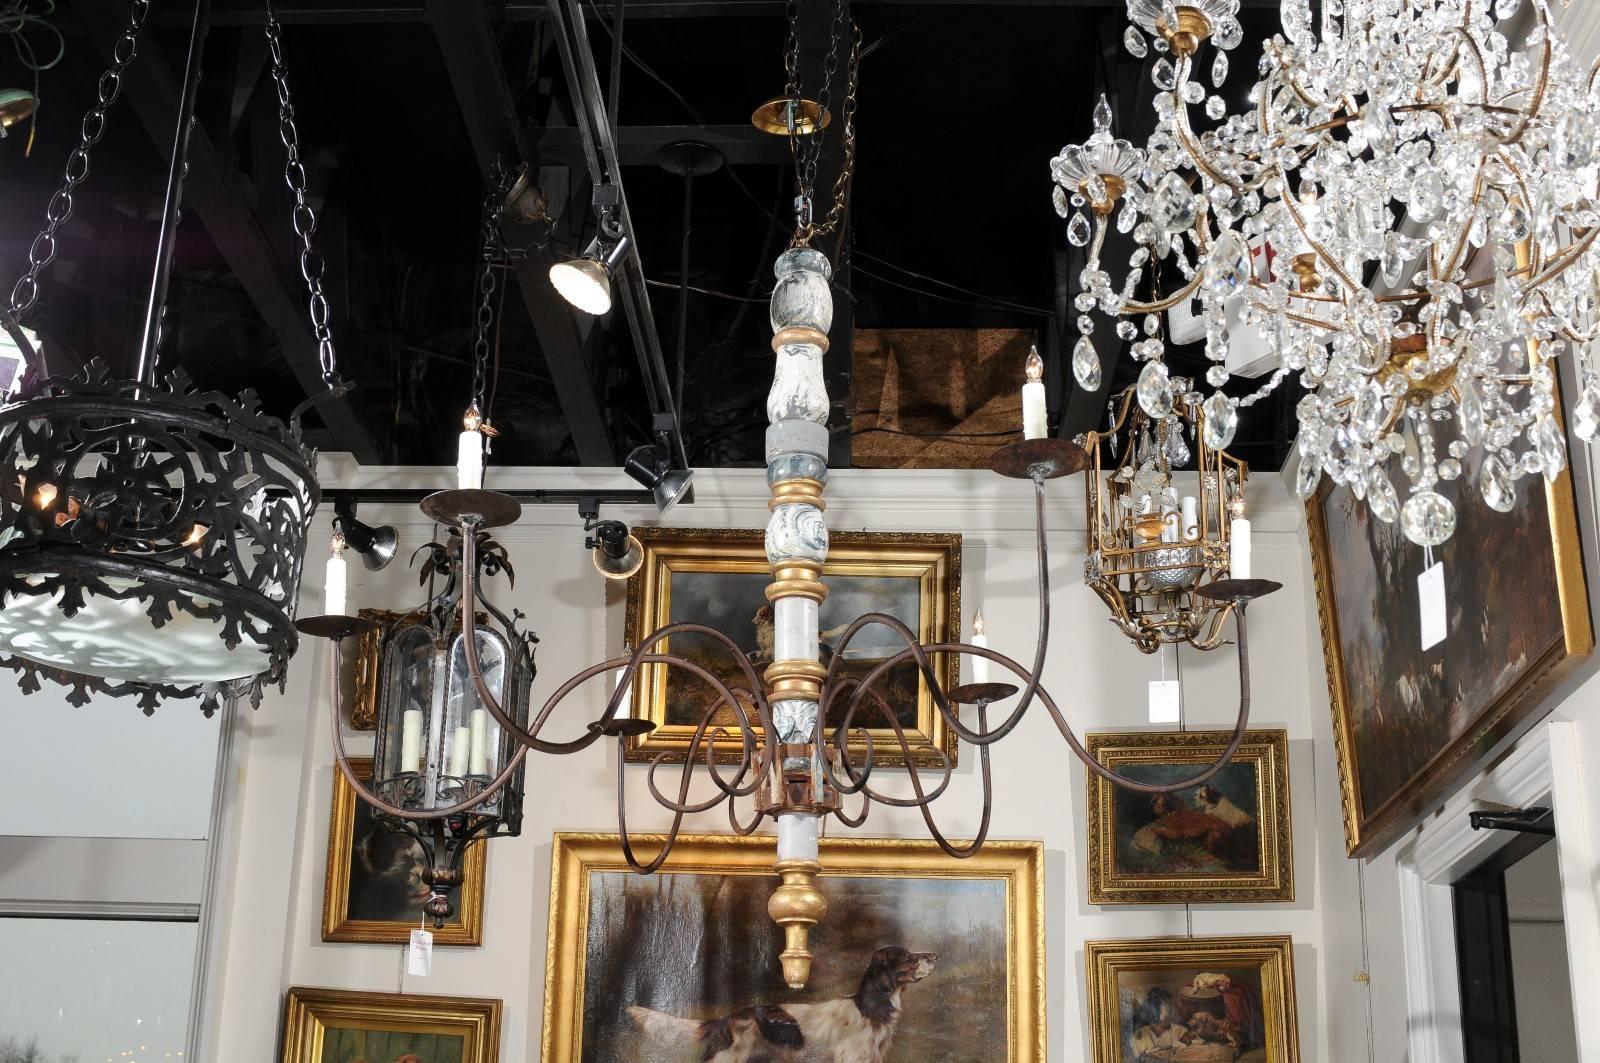 This turn of the century (19th to 20th) Italian candelabra style chandelier features a central painted and gilded wooden column, from which six iron swoop arms radiate. The thin arms support the metal bobèches as well as new authentic wax candle